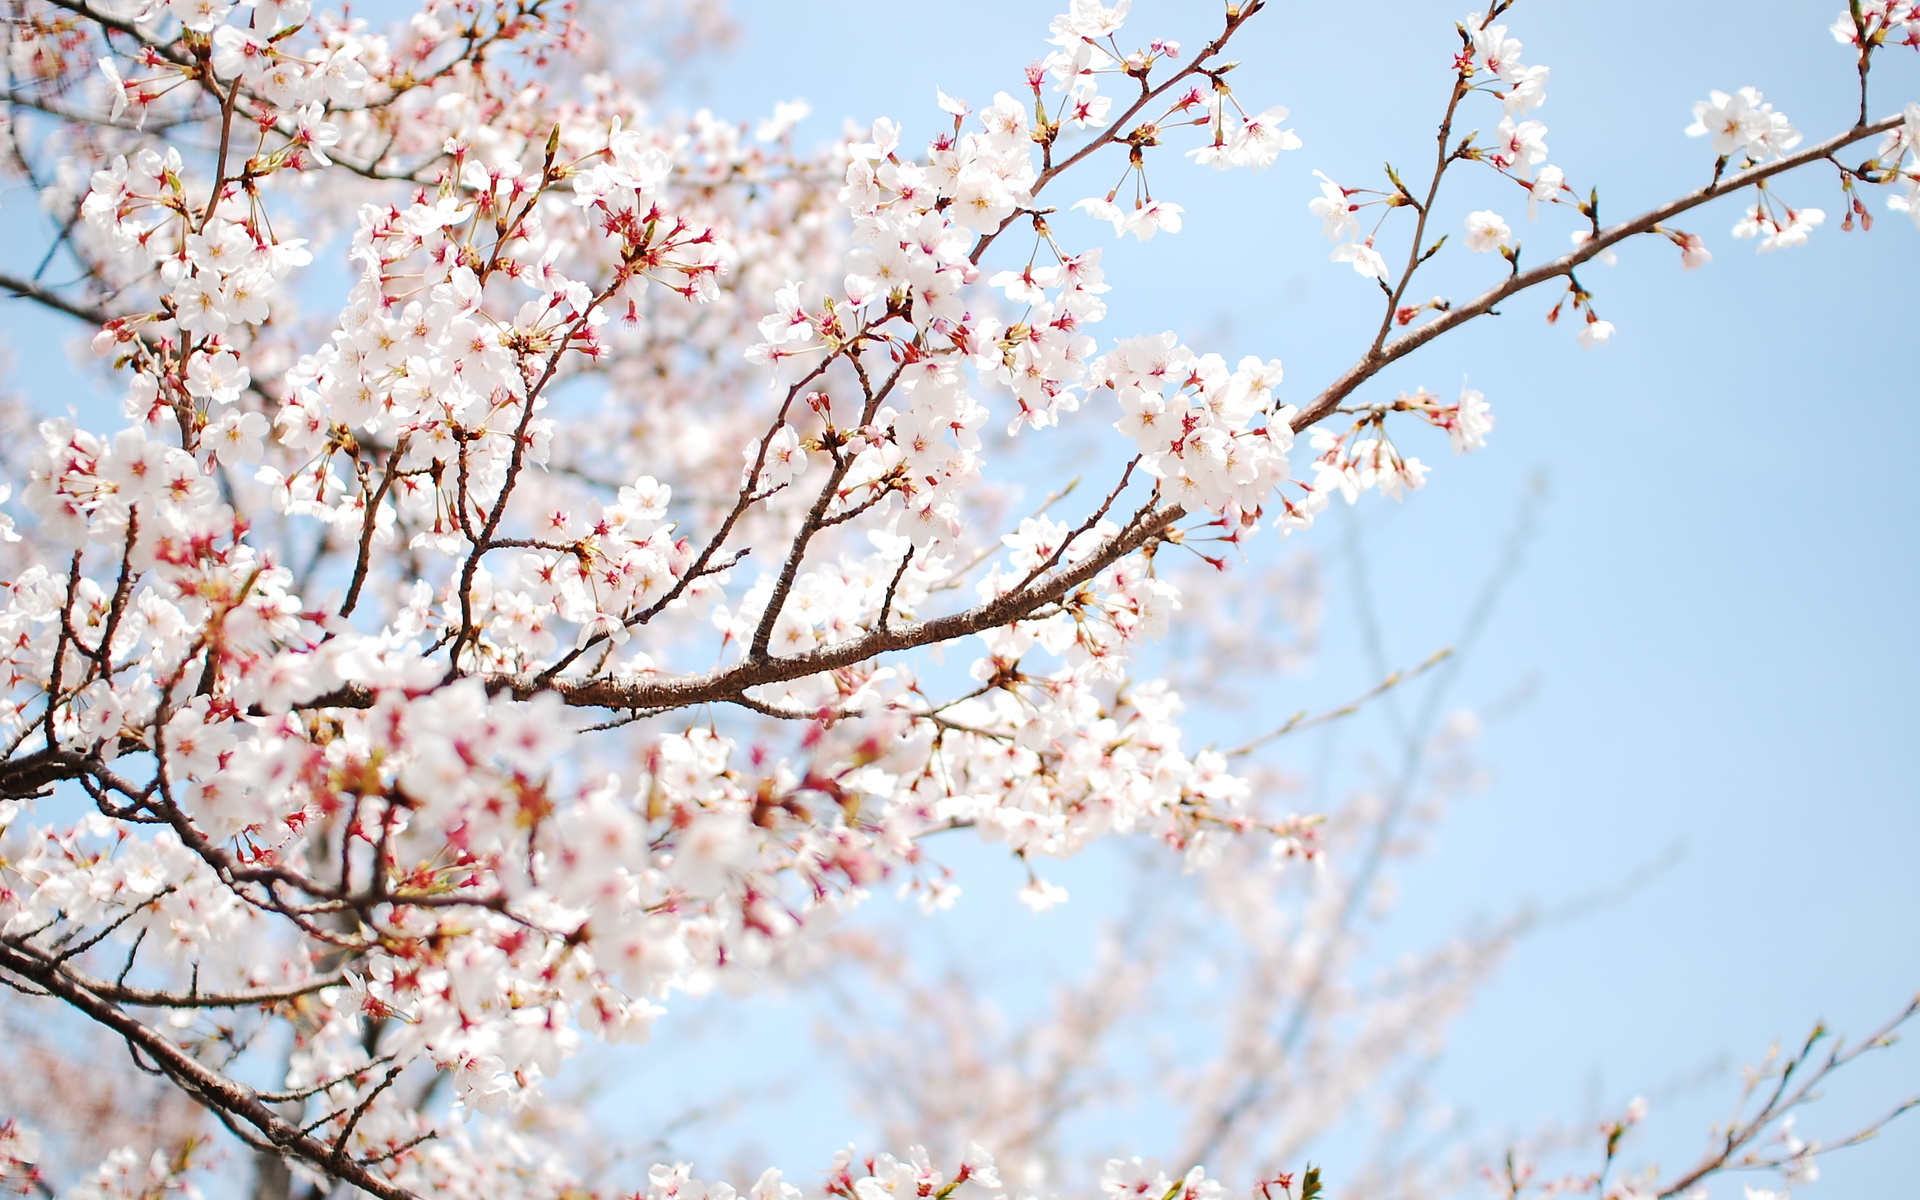 Cherry blossom tree hd wallpaper background hd wallpapers Chainimage